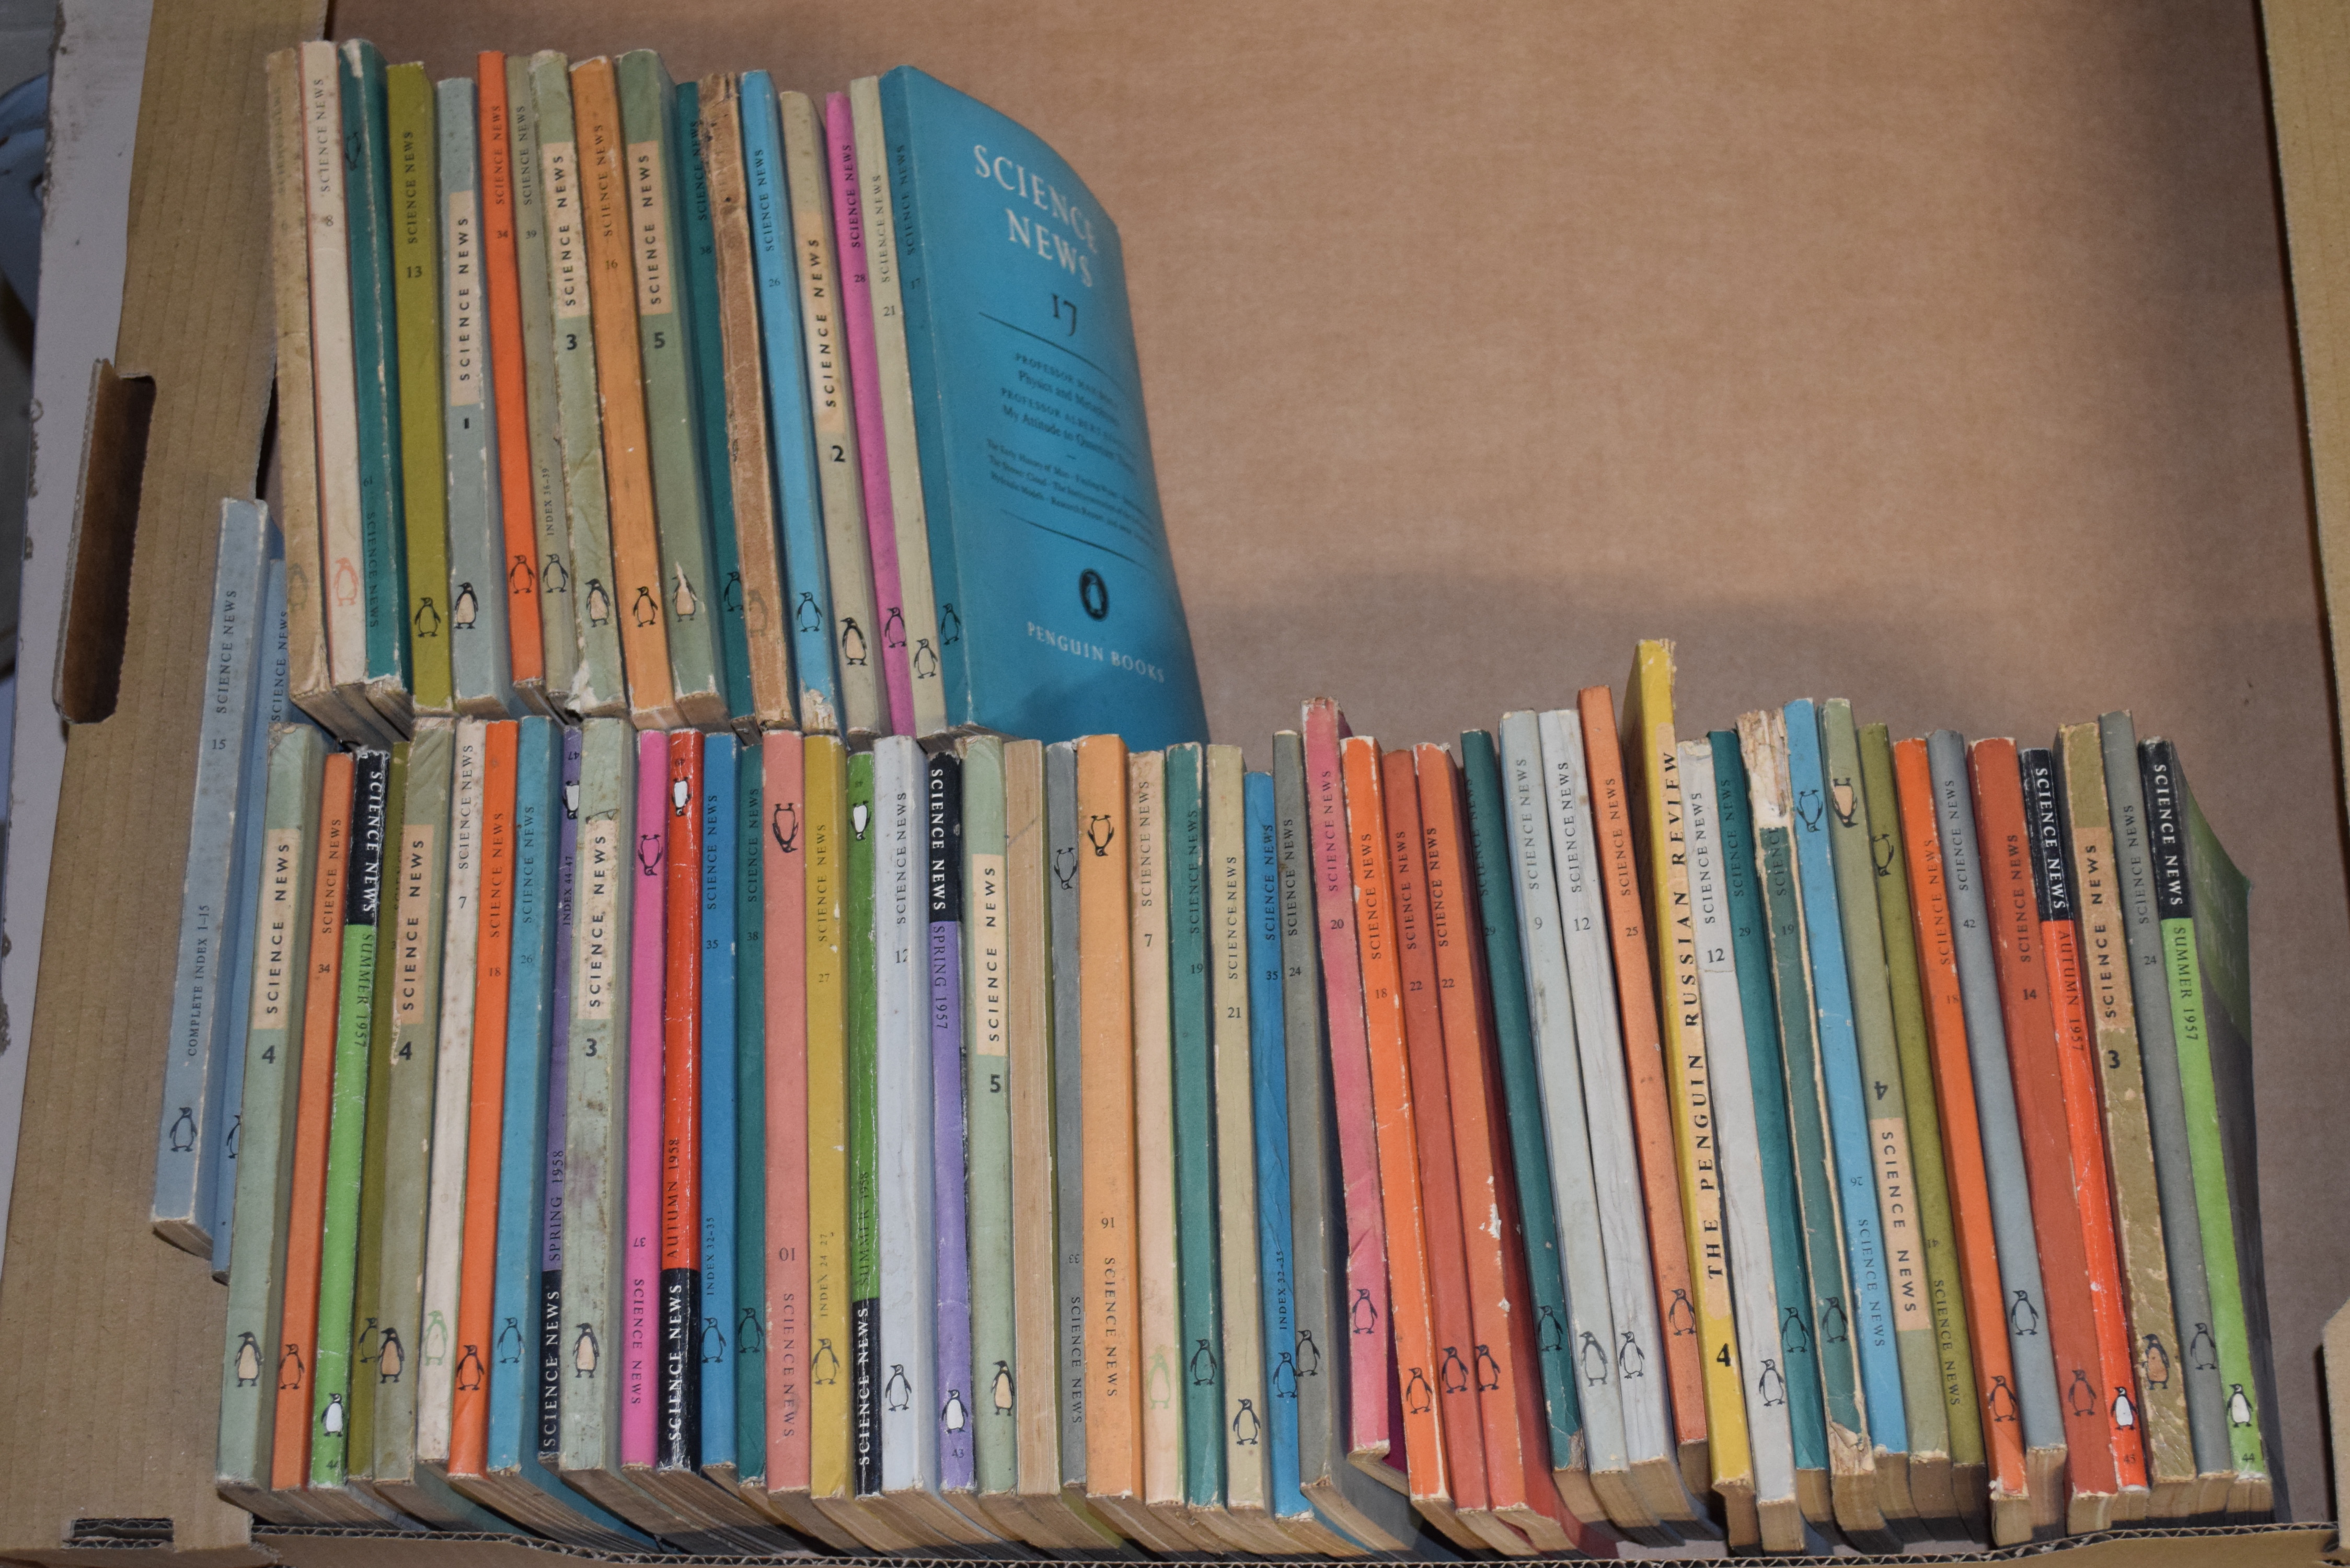 77 VOLS "SCIENCE NEWS" BY PENGUIN BOOKS, REF 752B